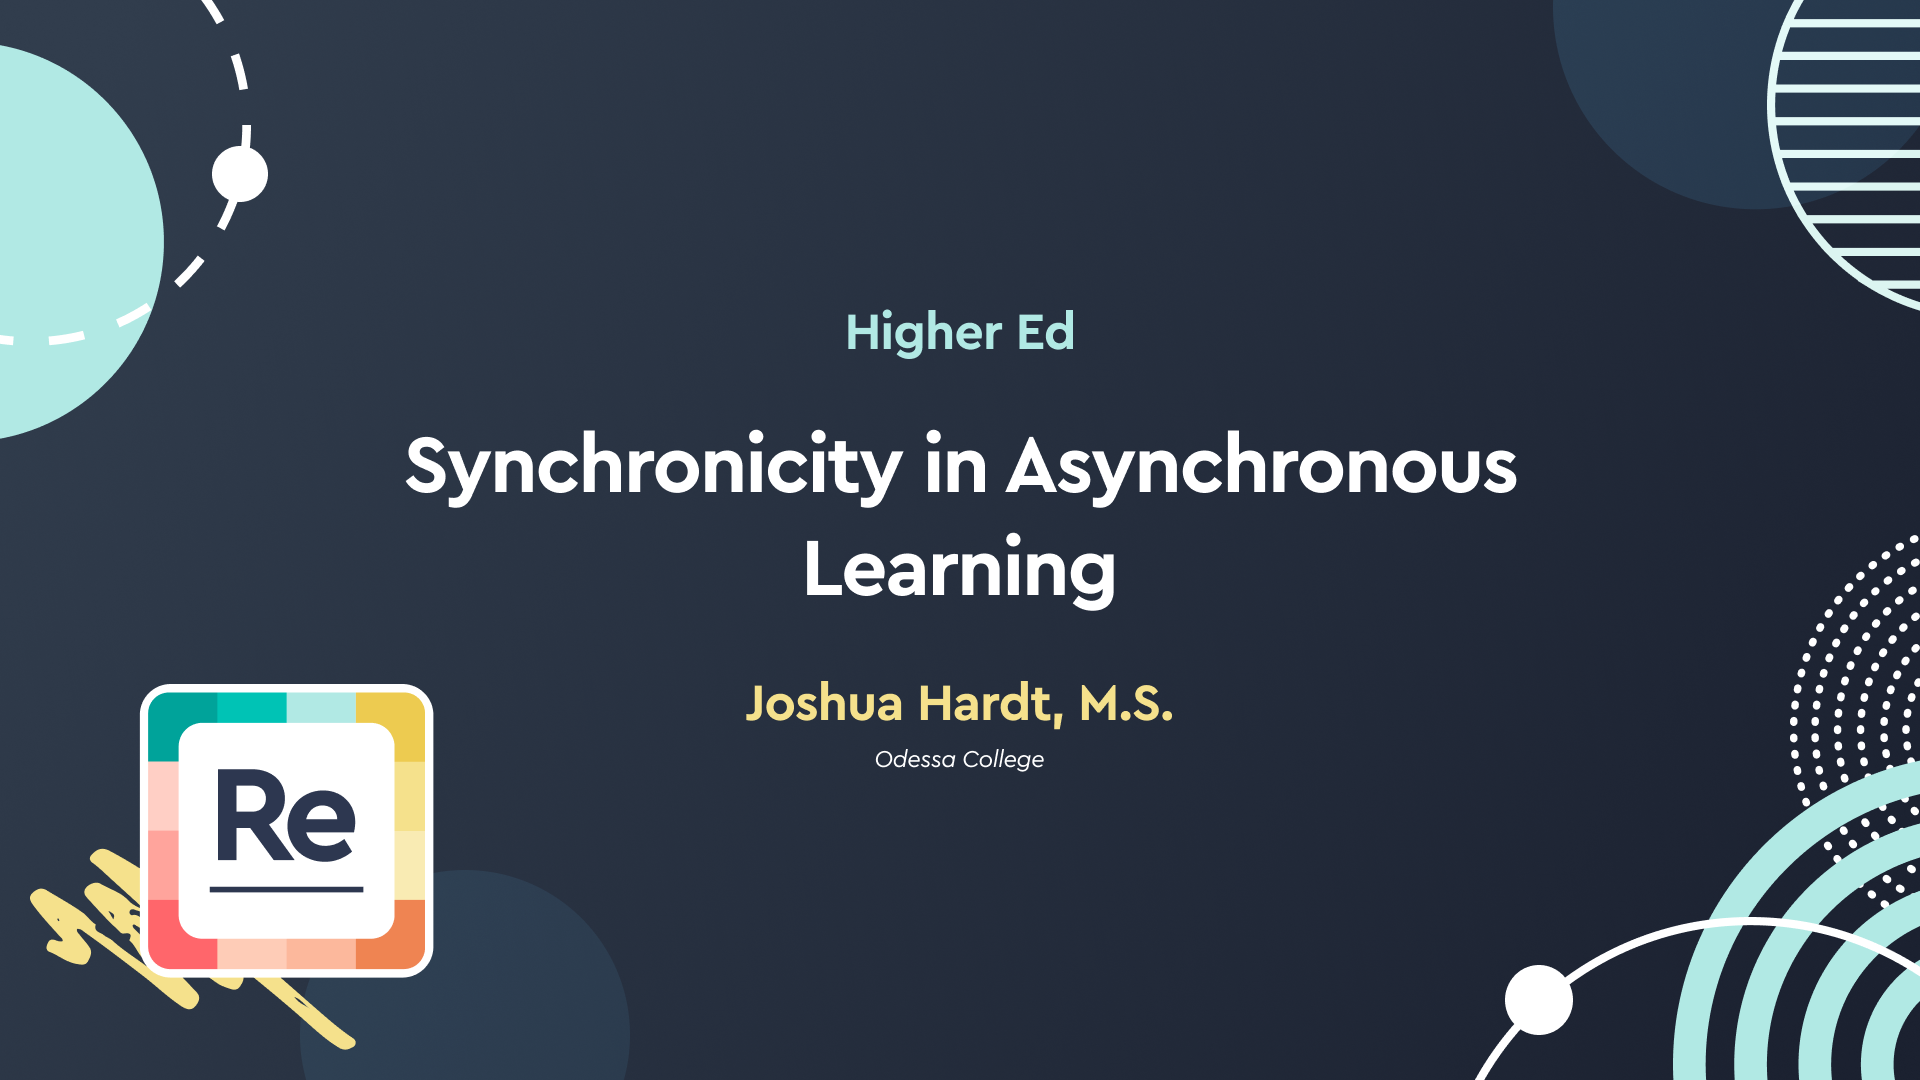 Synchronicity in Asynchronous Learning